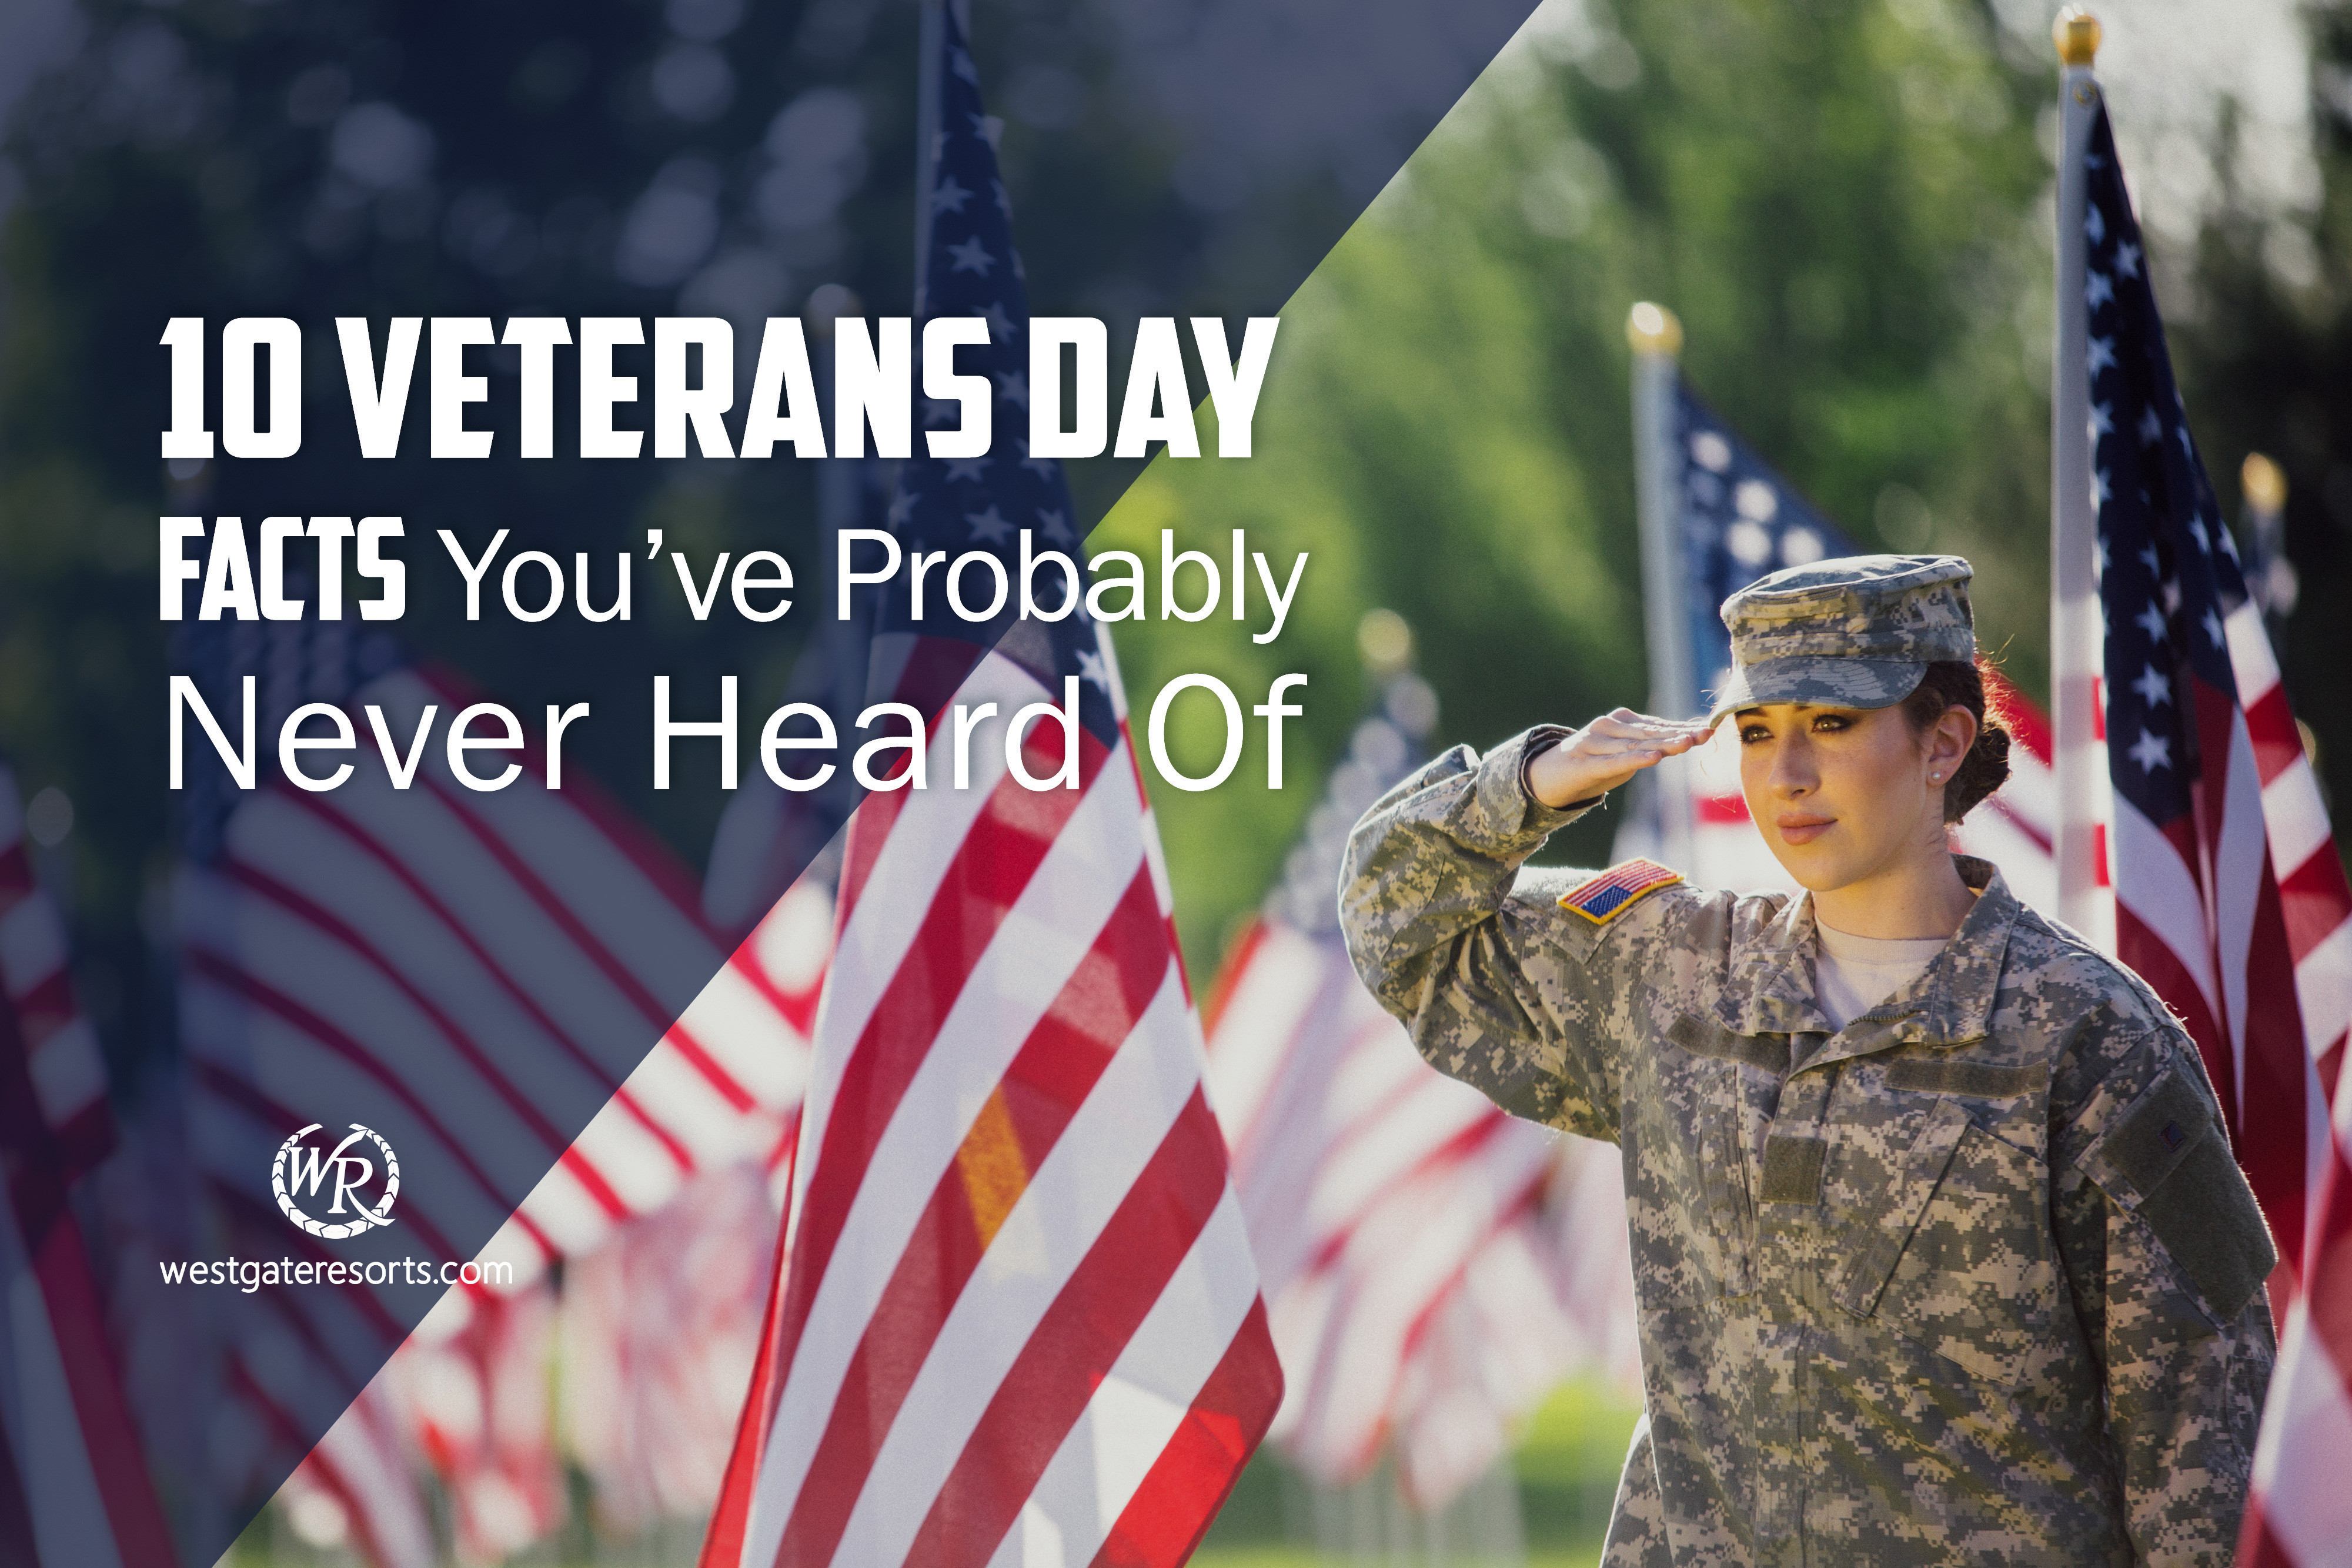 10 Veterans Day Facts You’ve Probably Never Heard Of